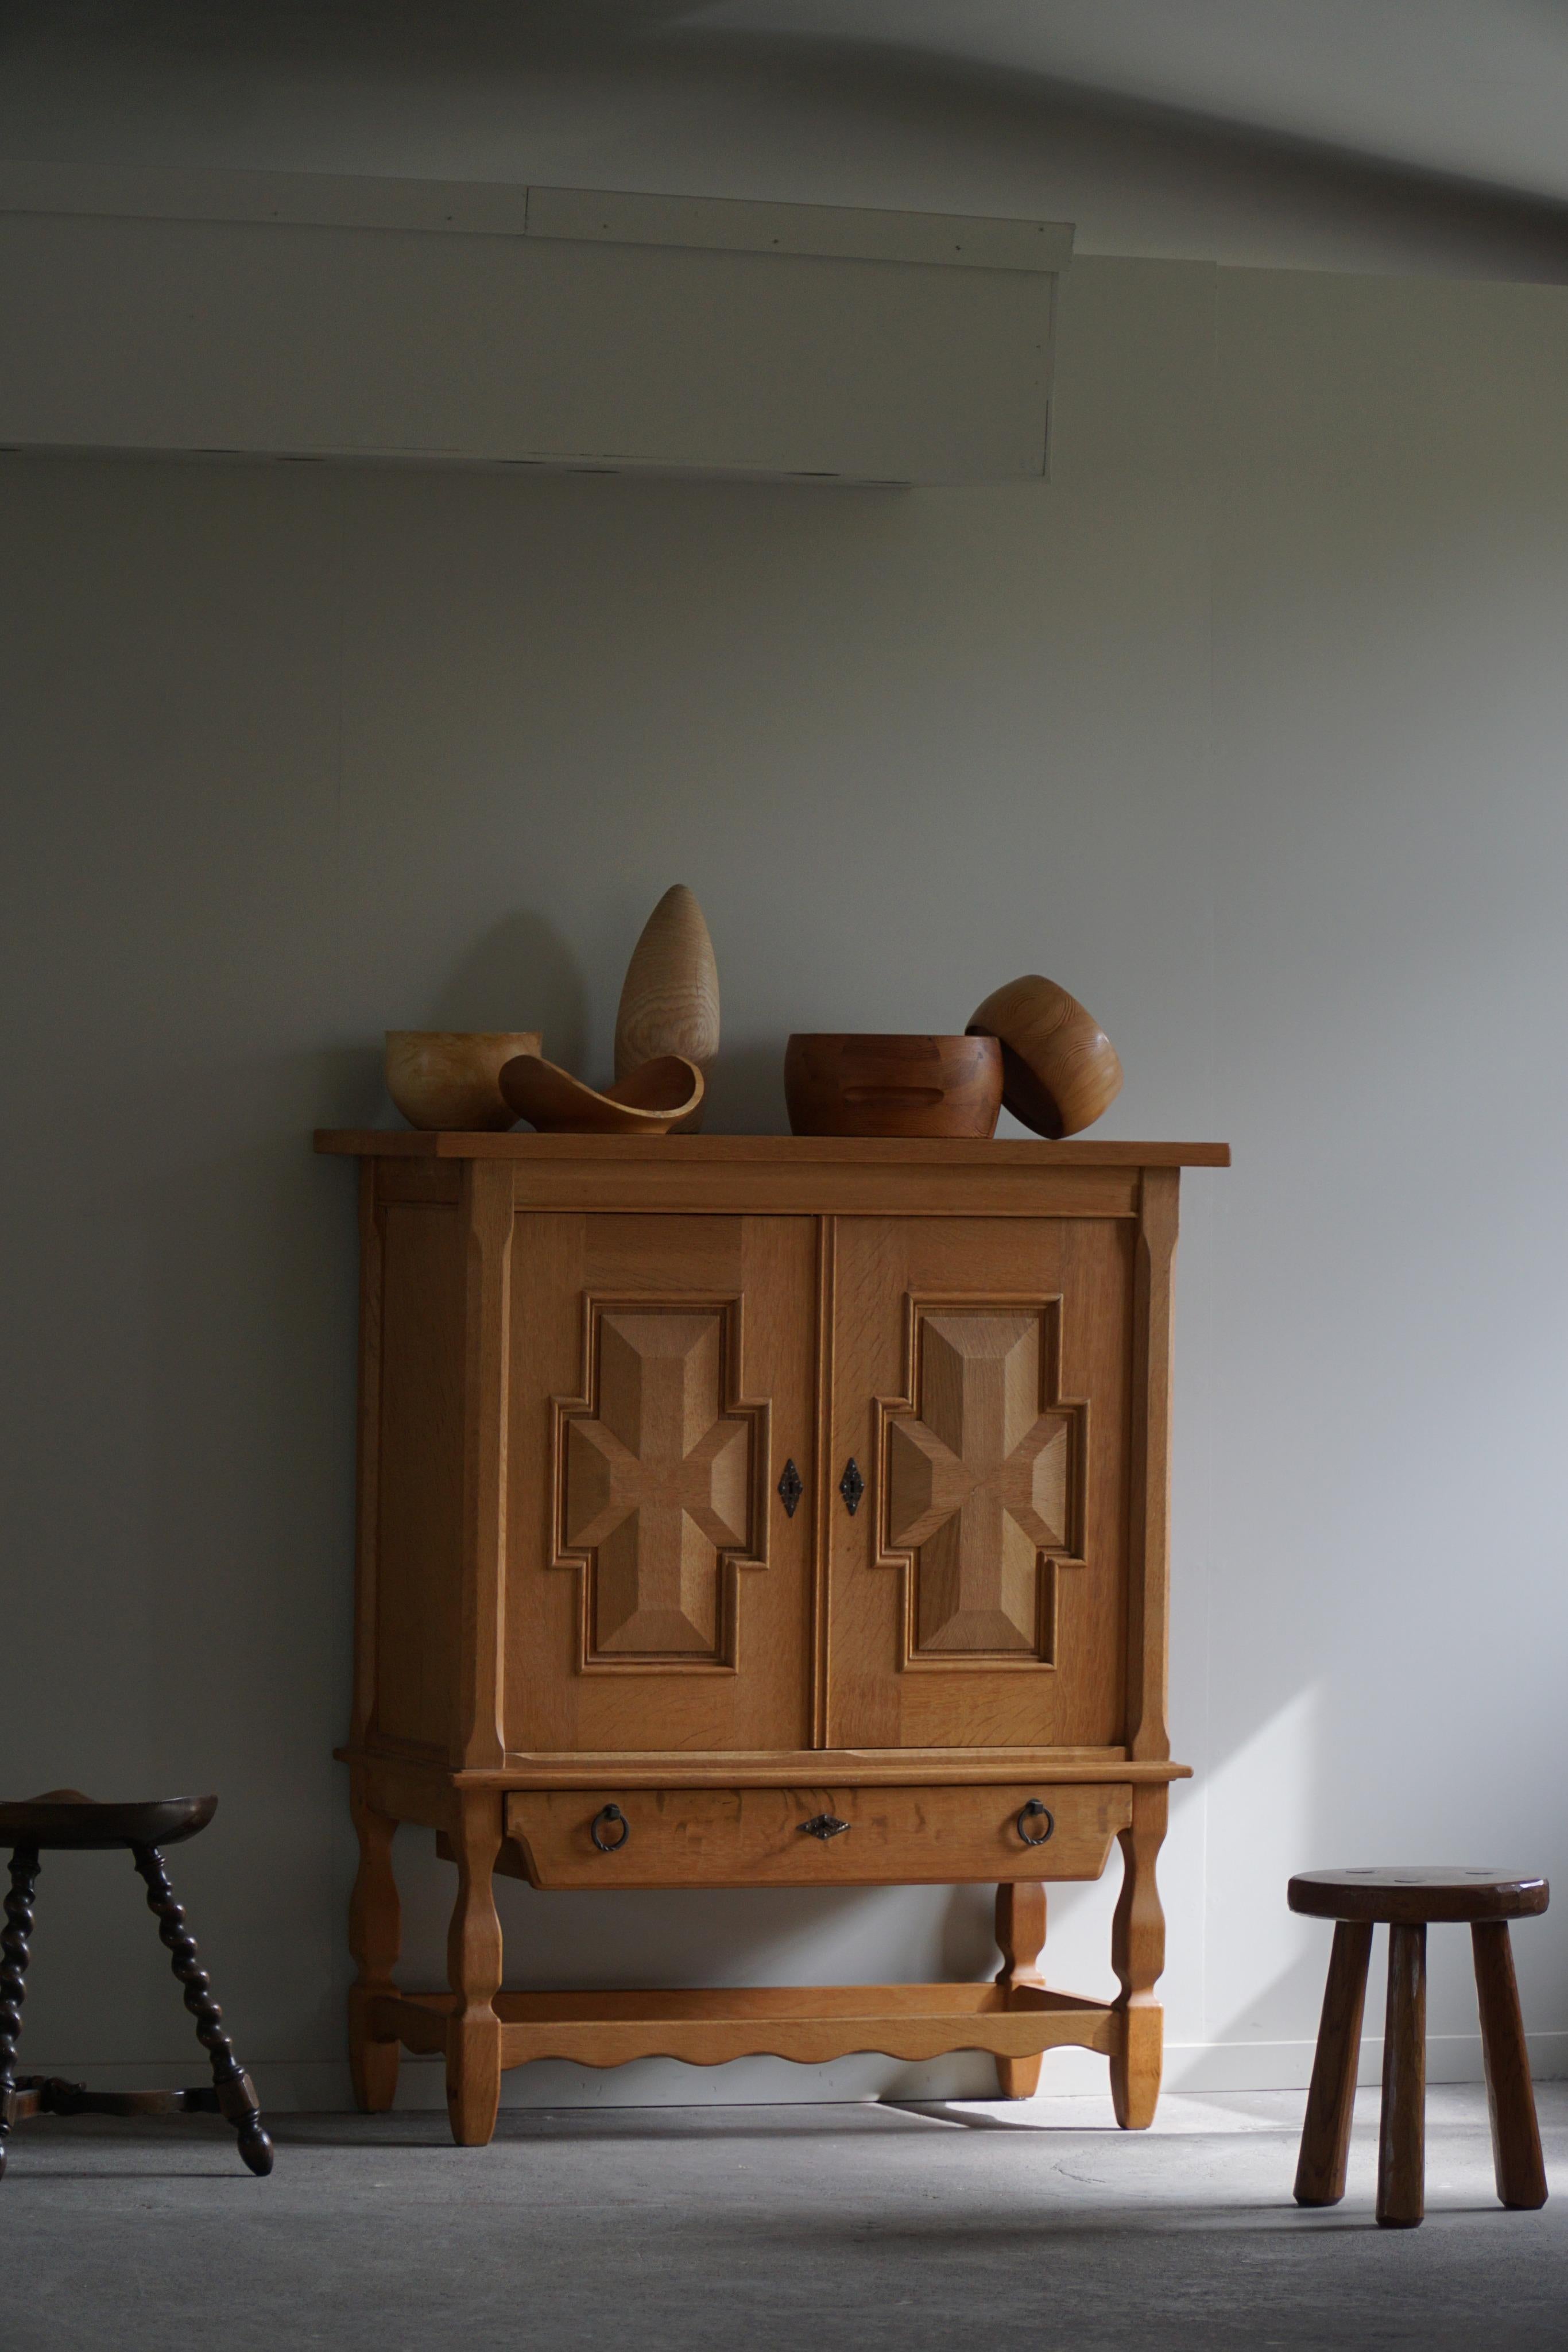 A tall classic sideboard / cabinet in oak with great storage space. Designed by Henning (Henry) Kjærnulf for E.G møbler in 1960s. A nice sculptural front pattern.

This fine brutalist cabinet will complement many interior styles. A modern,